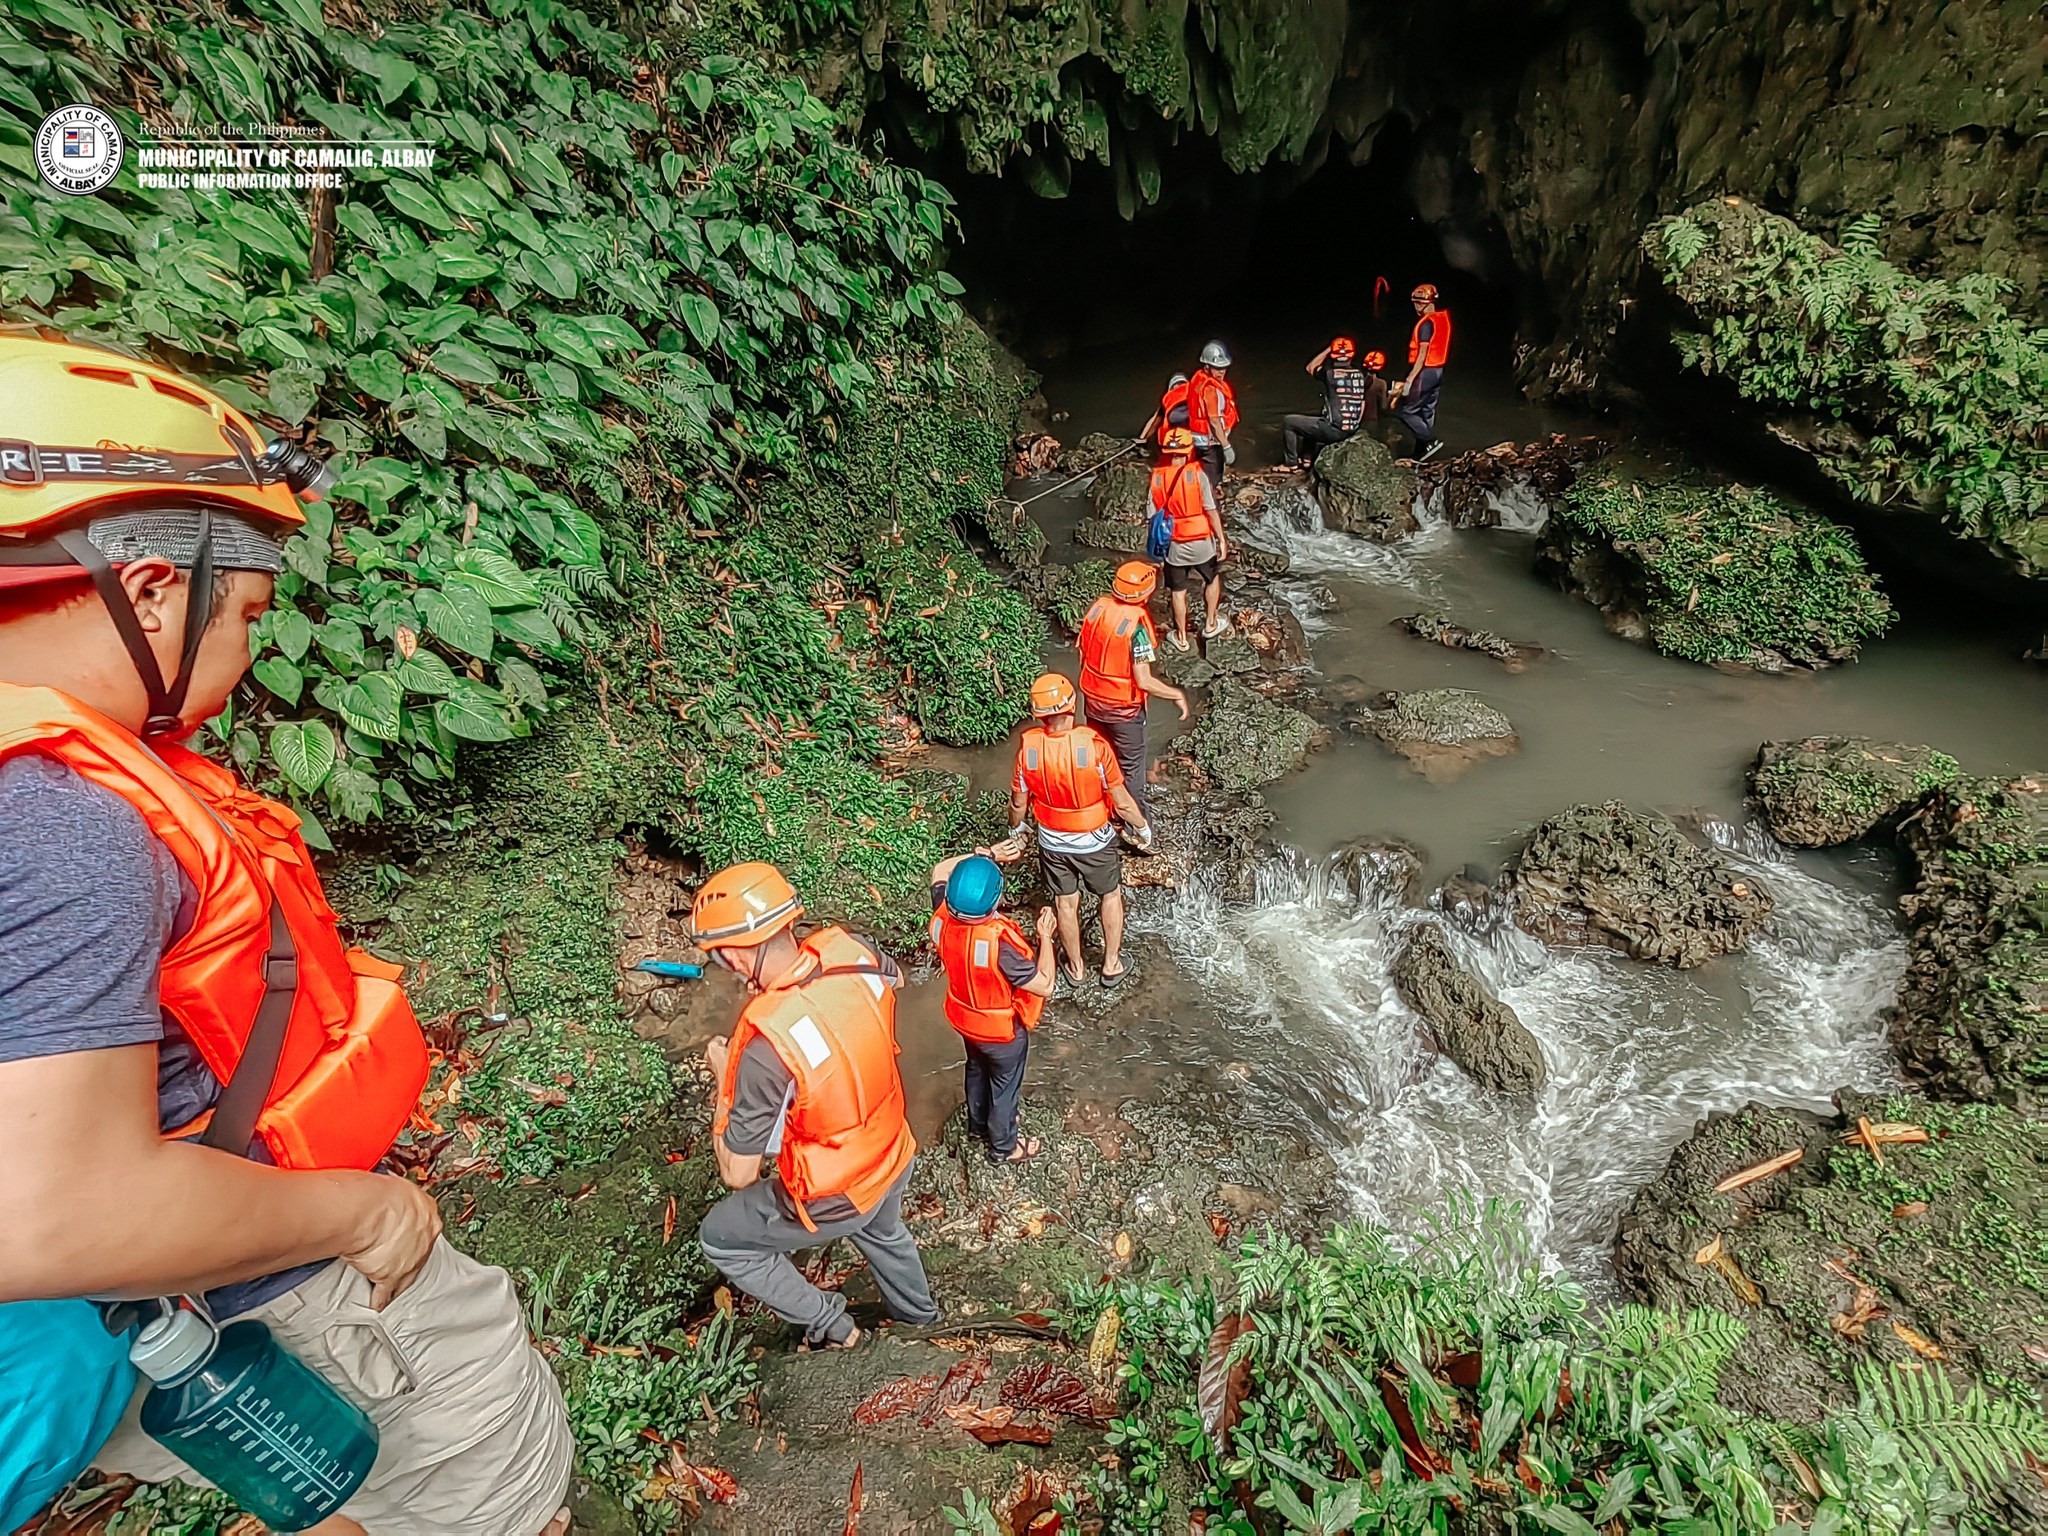 municipal tourism team conducts an initial area and risk assessment at the Calabidongan Cave